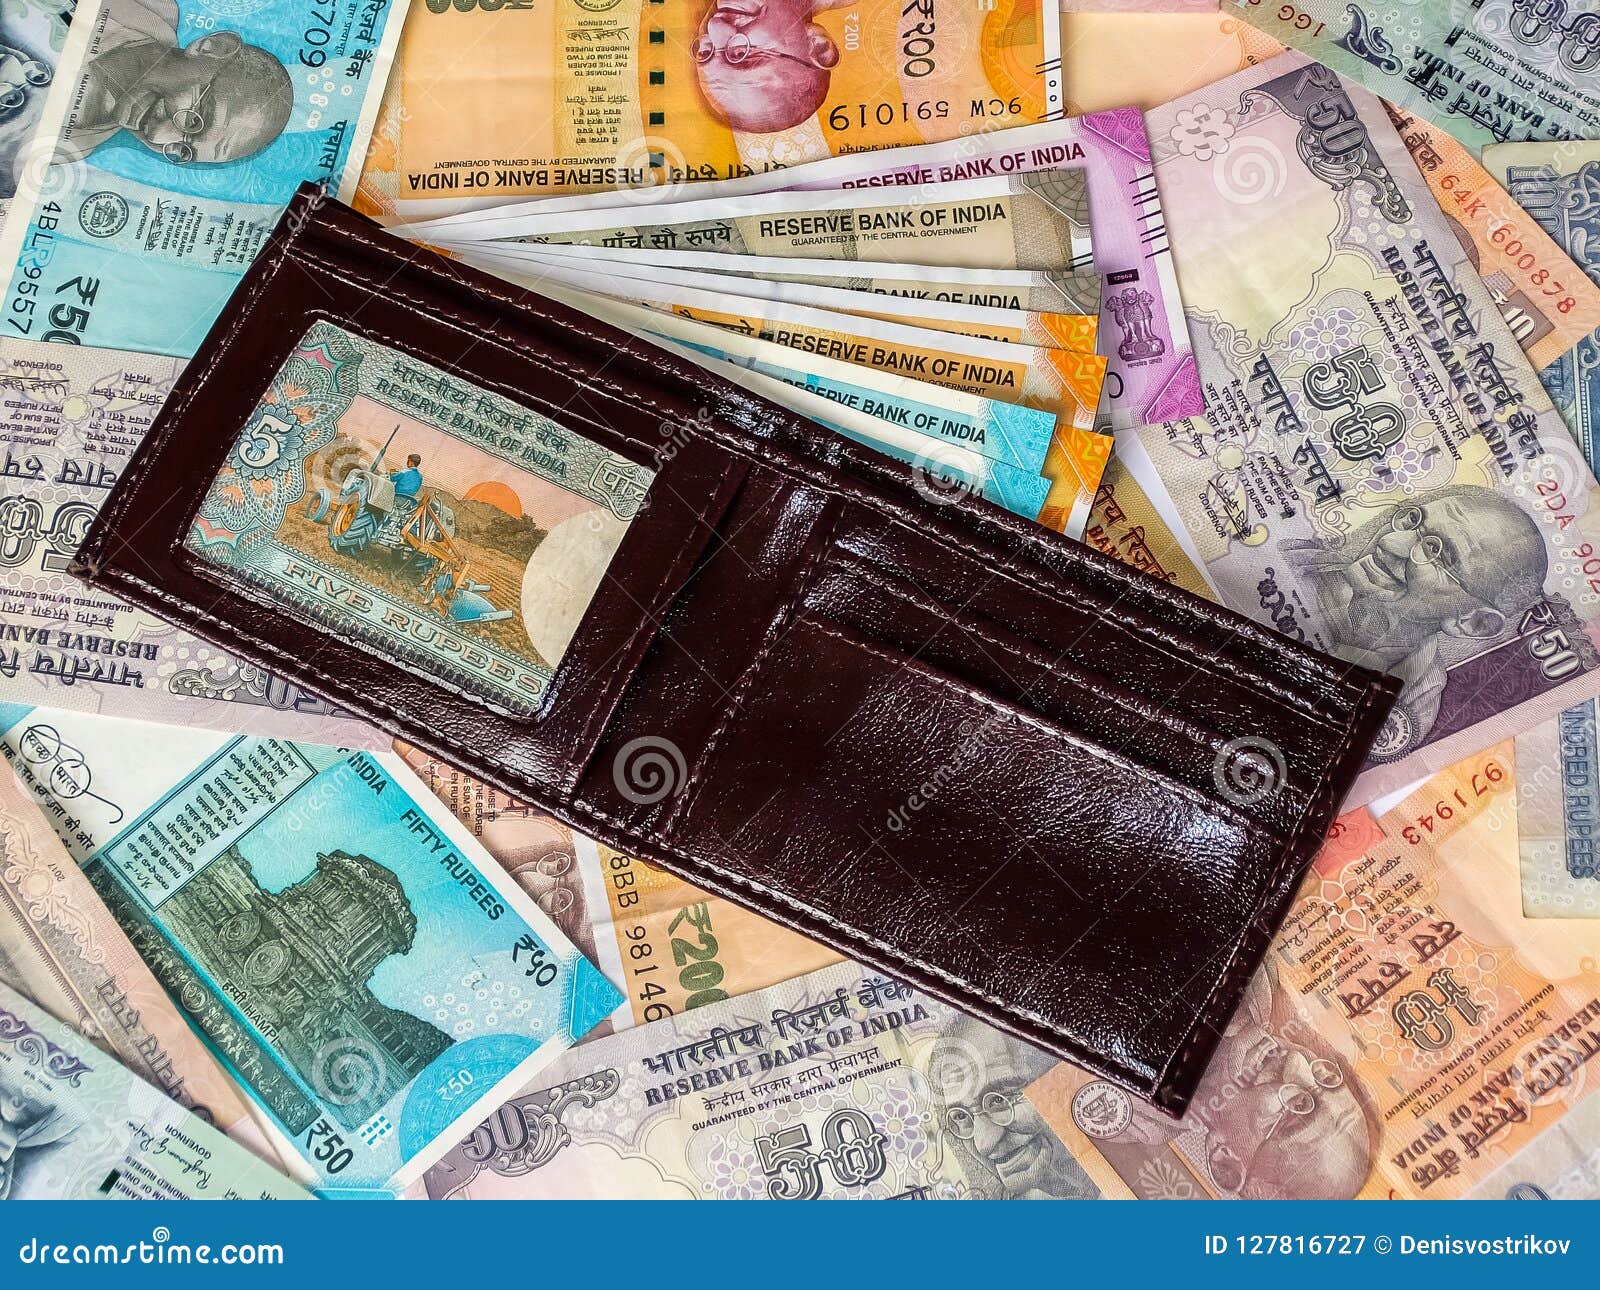 wallet ten twenty fifty one two five hundred two thousand rupee note indian currency rupees old new banknotes 127816727